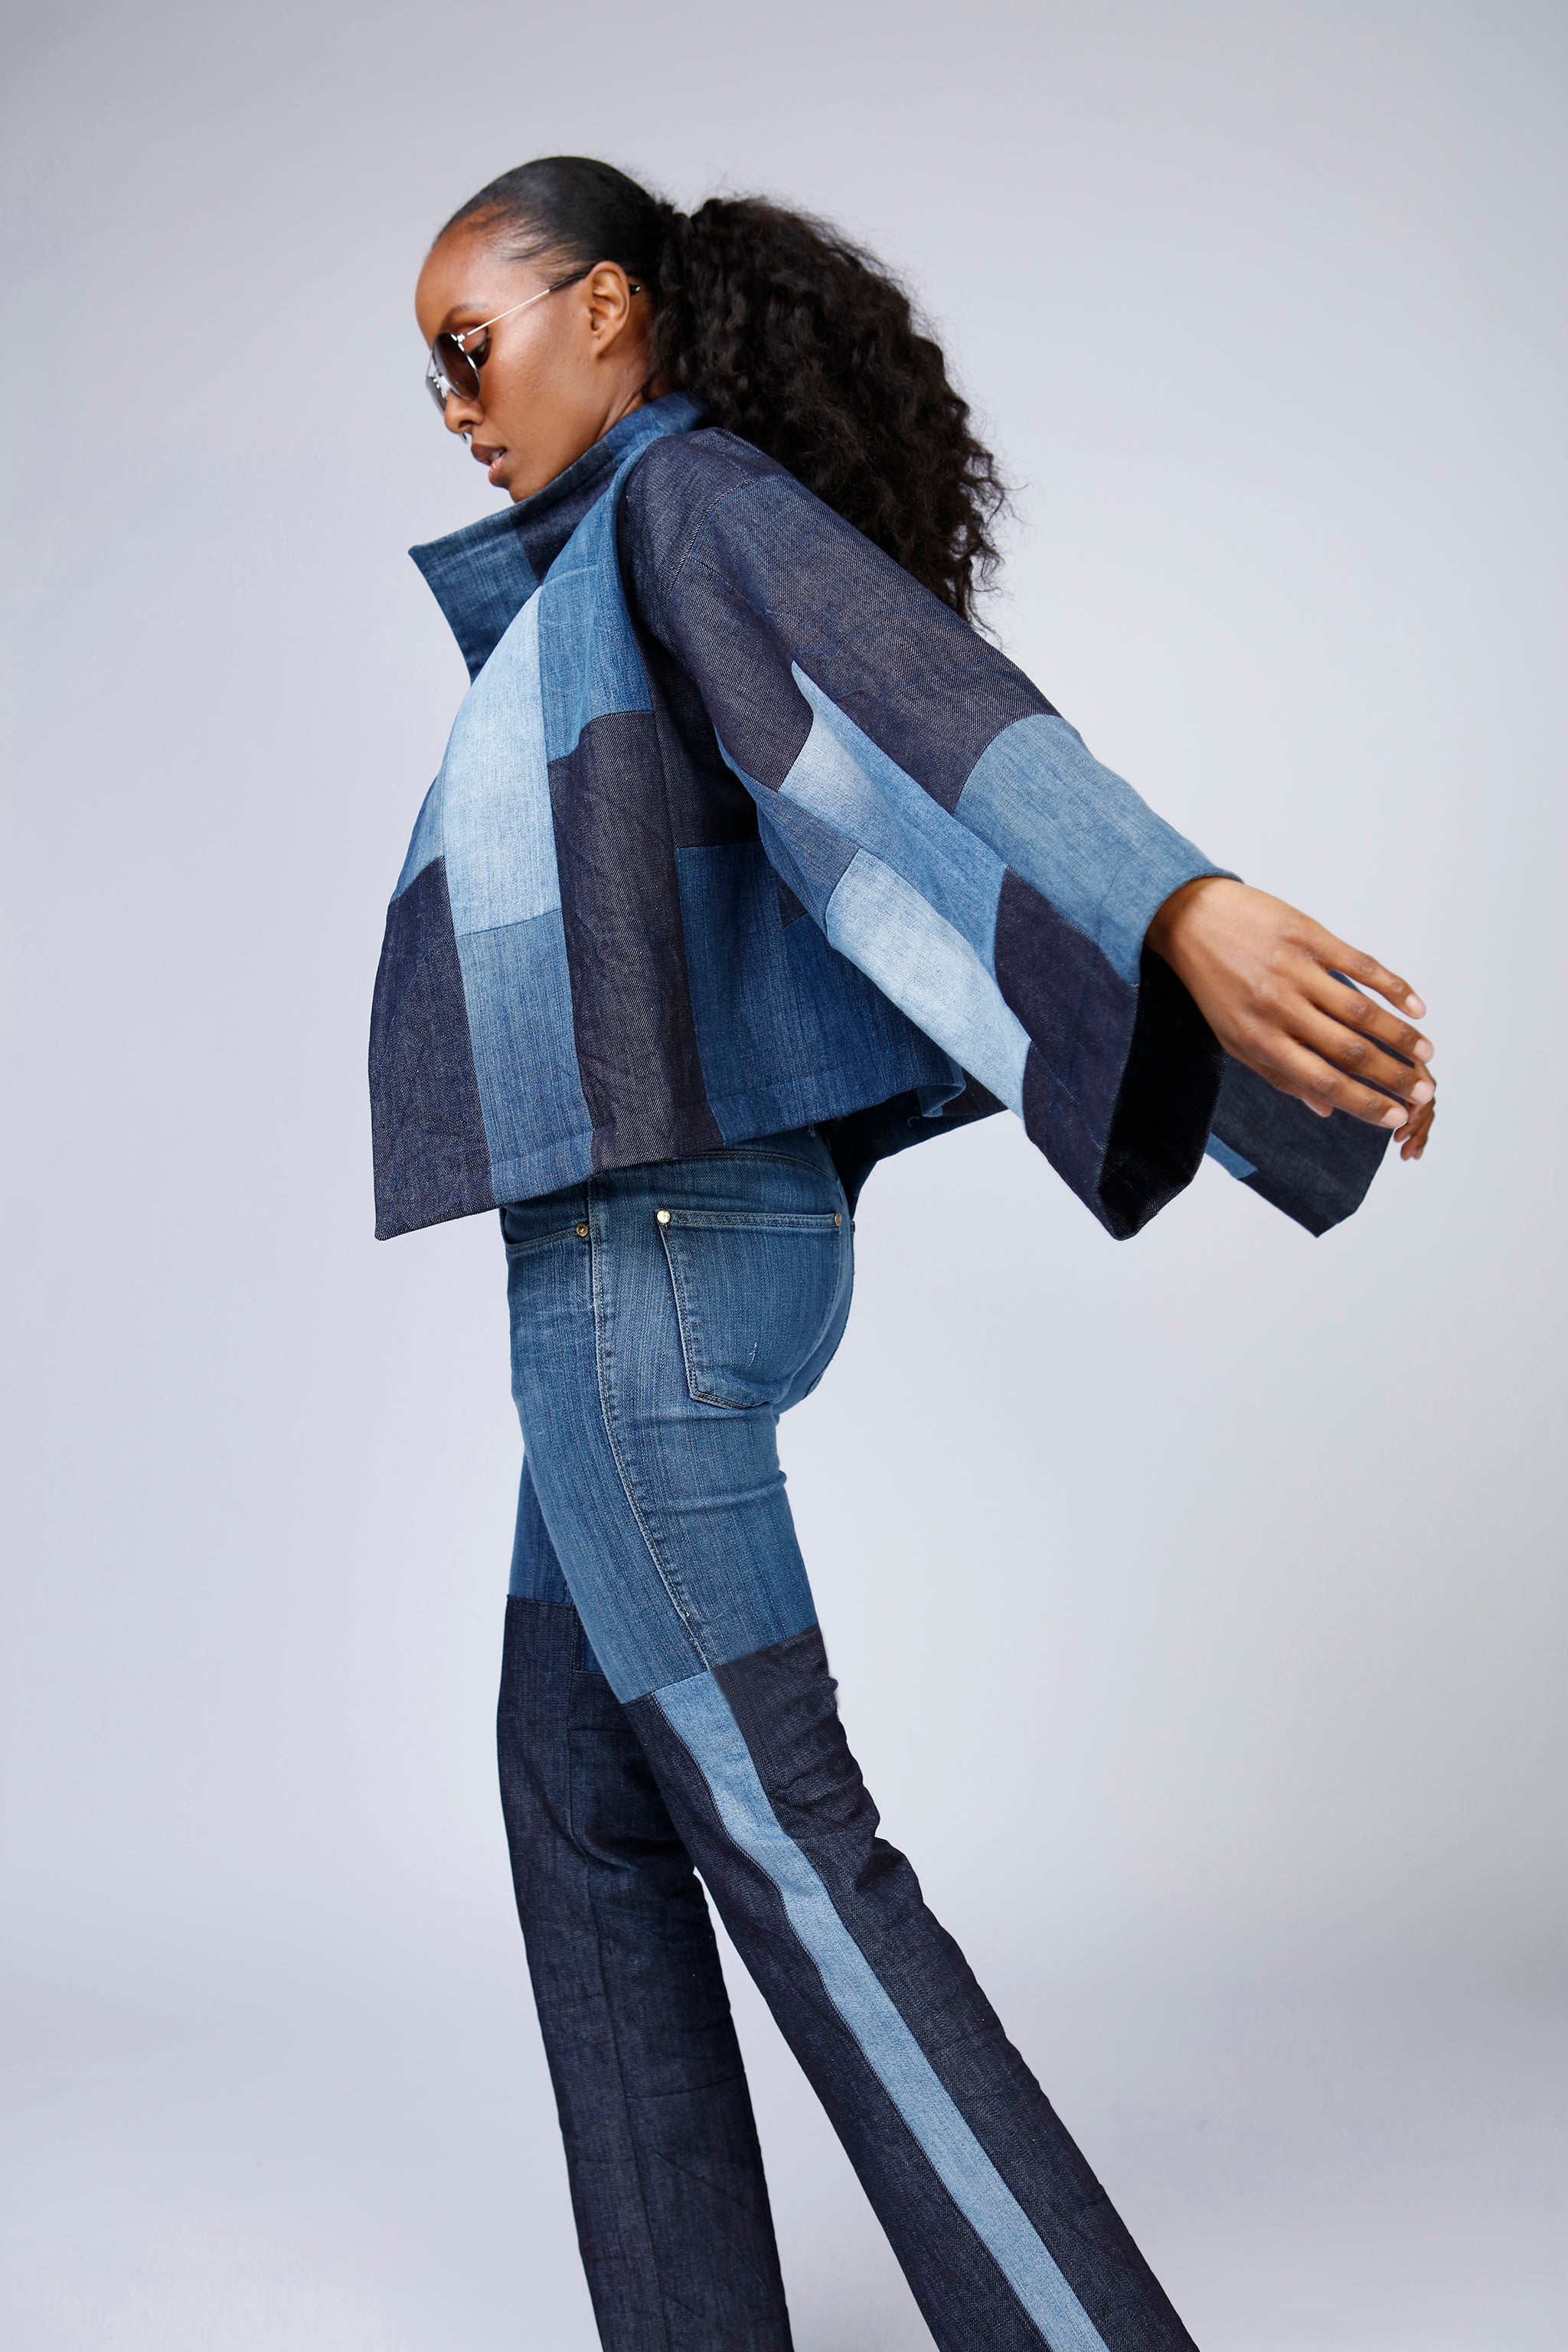 Look: Patchwork Jacket and Jeans